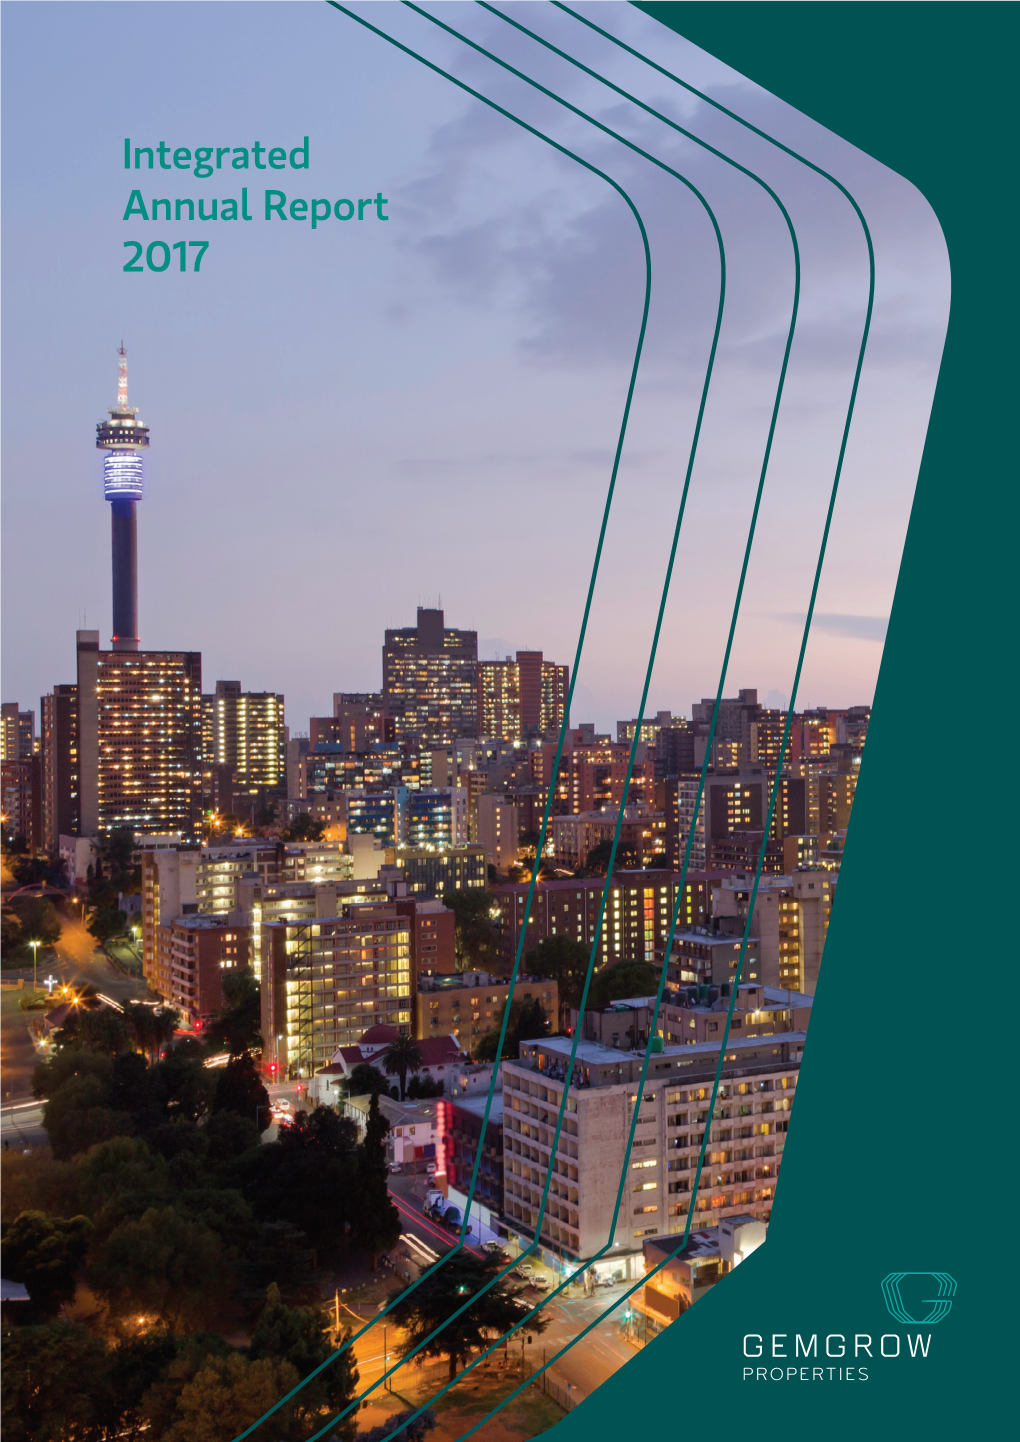 Gemgrow Properties Integrated Annual Report 2017